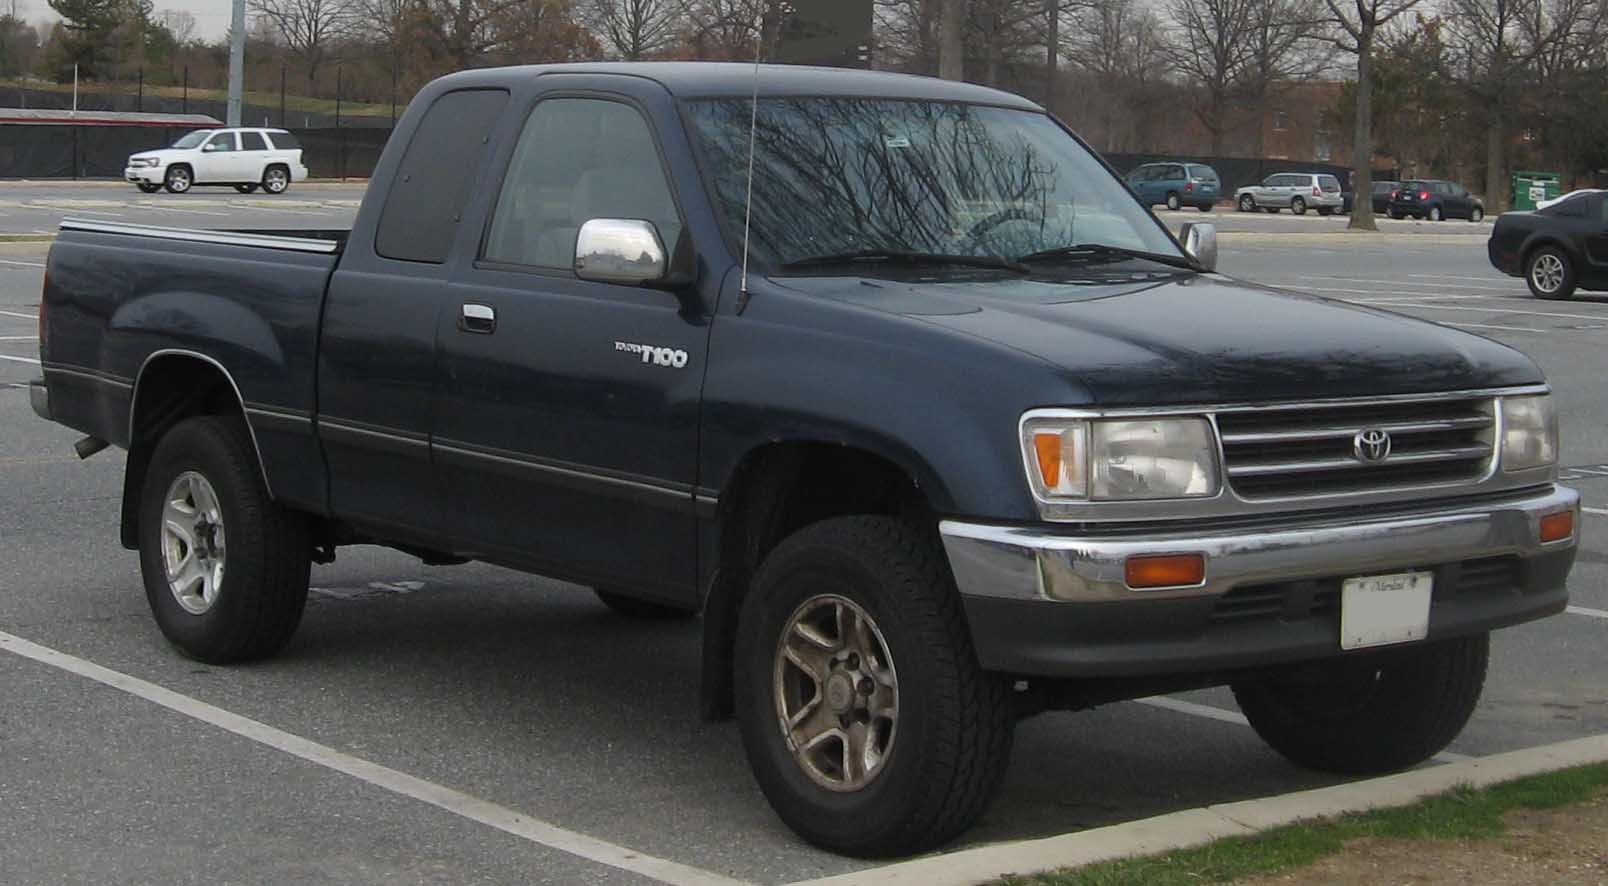 Toyota T100 - parked in a parking lot